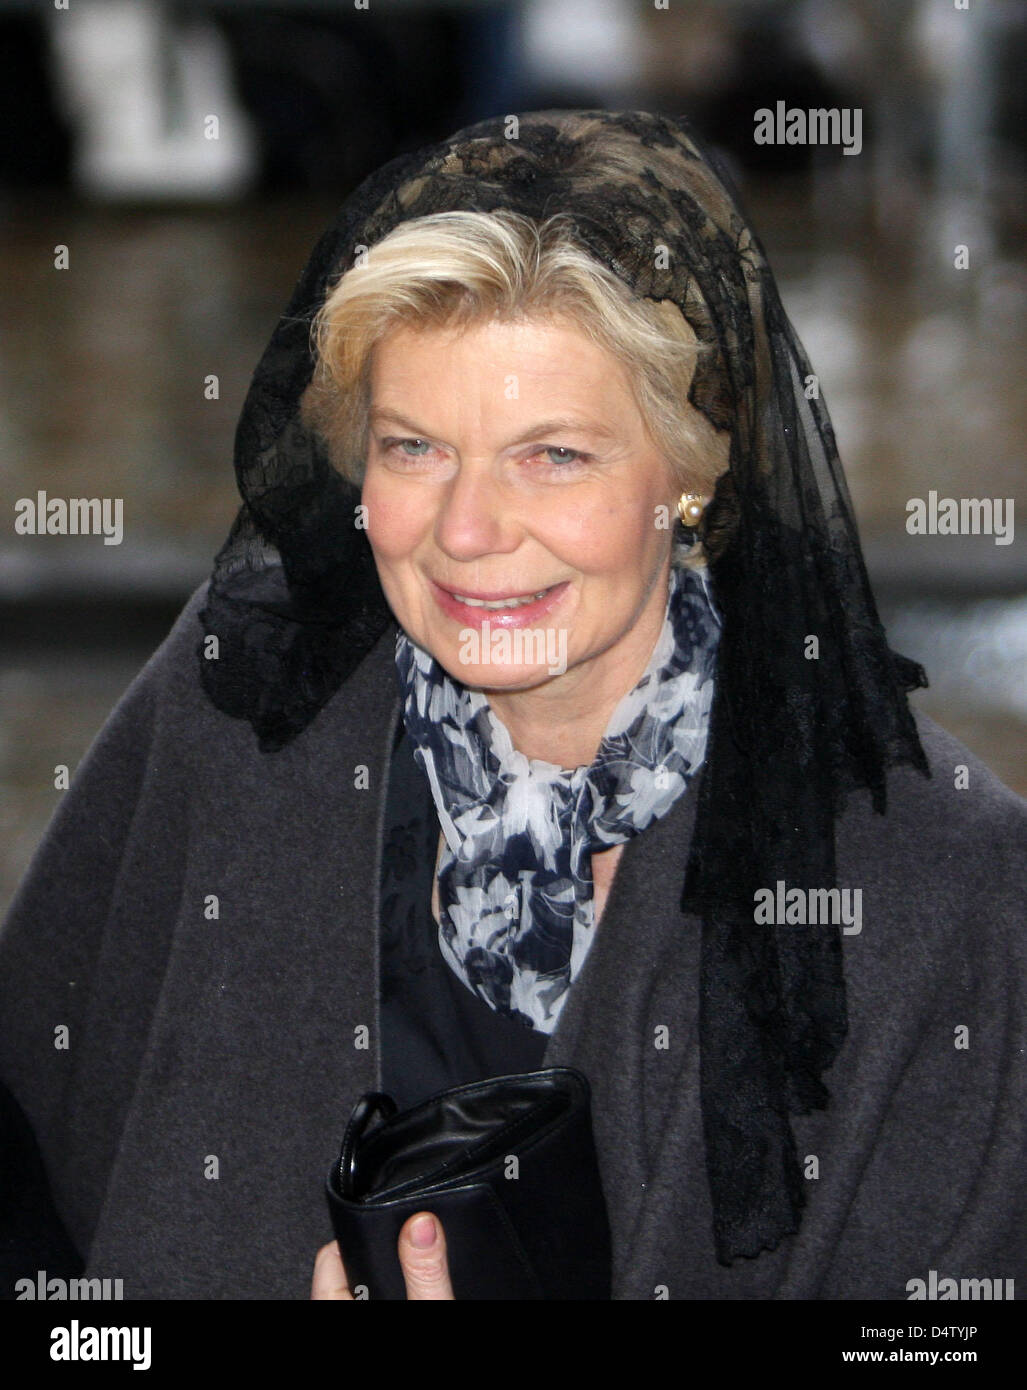 Princess Marie-Astrid of Luxembourg attends the funeral ceremony for Prince Alexandre of Belgium in Laken, Belgium, 04 December 2009. Prince Alexander died on 29 November 2009. He was the half-brother of King Albert II of Belgium. Photo: Albert Nieboer (NETHERLANDS OUT) Stock Photo